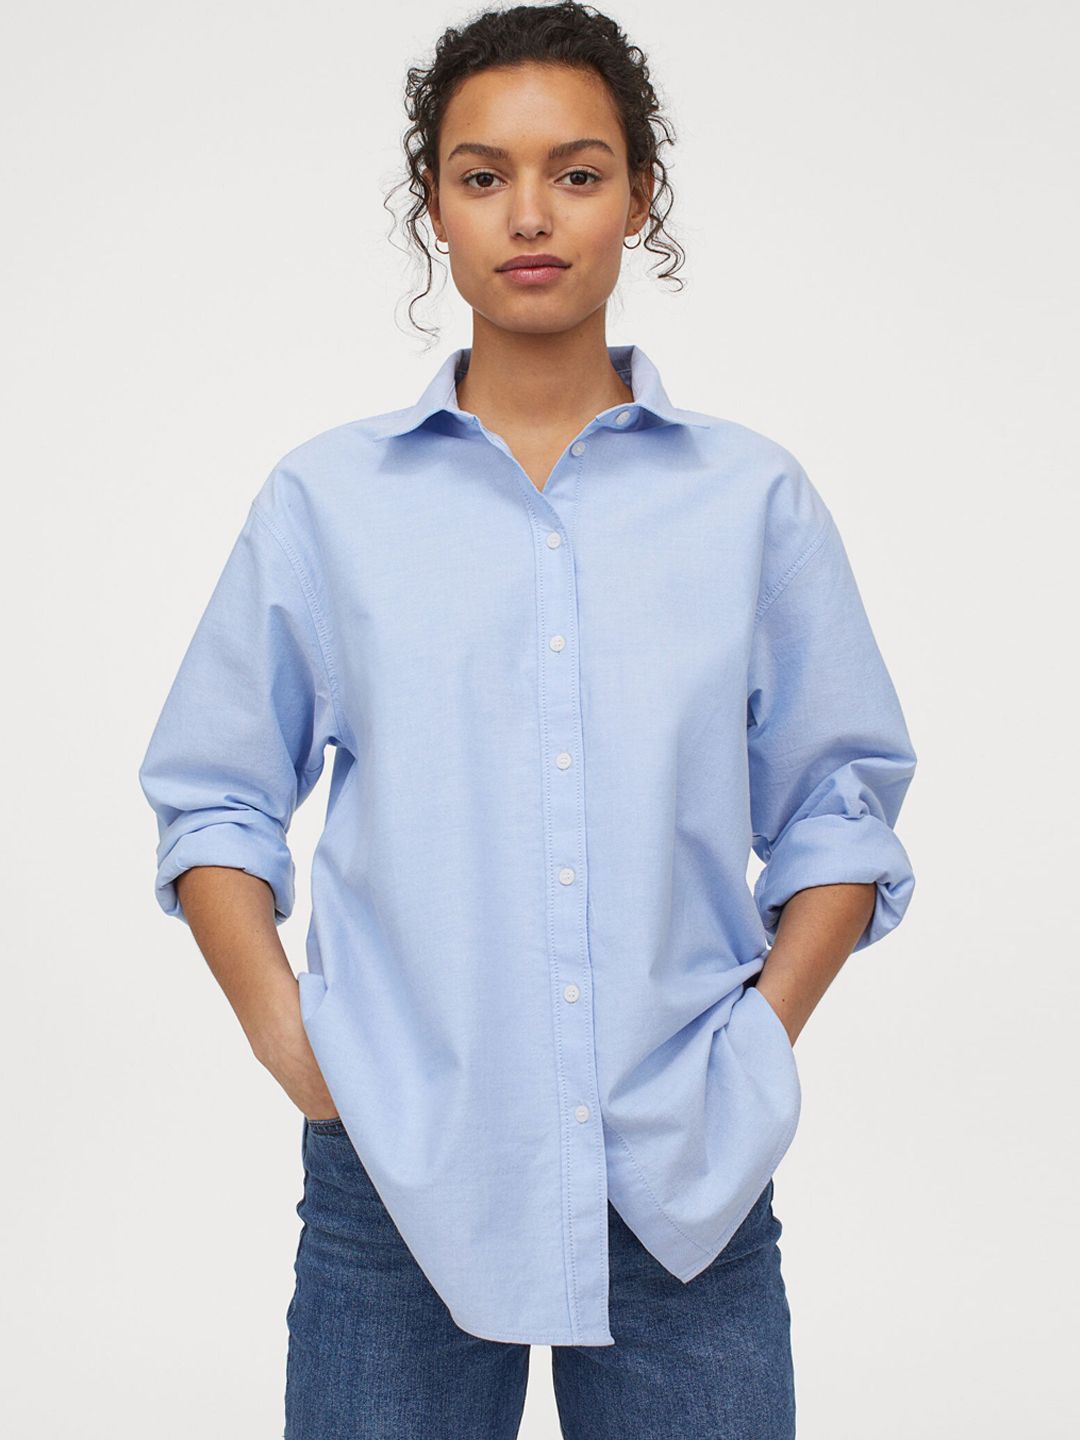 H&M Women Blue Oversized Oxford Shirt Price in India